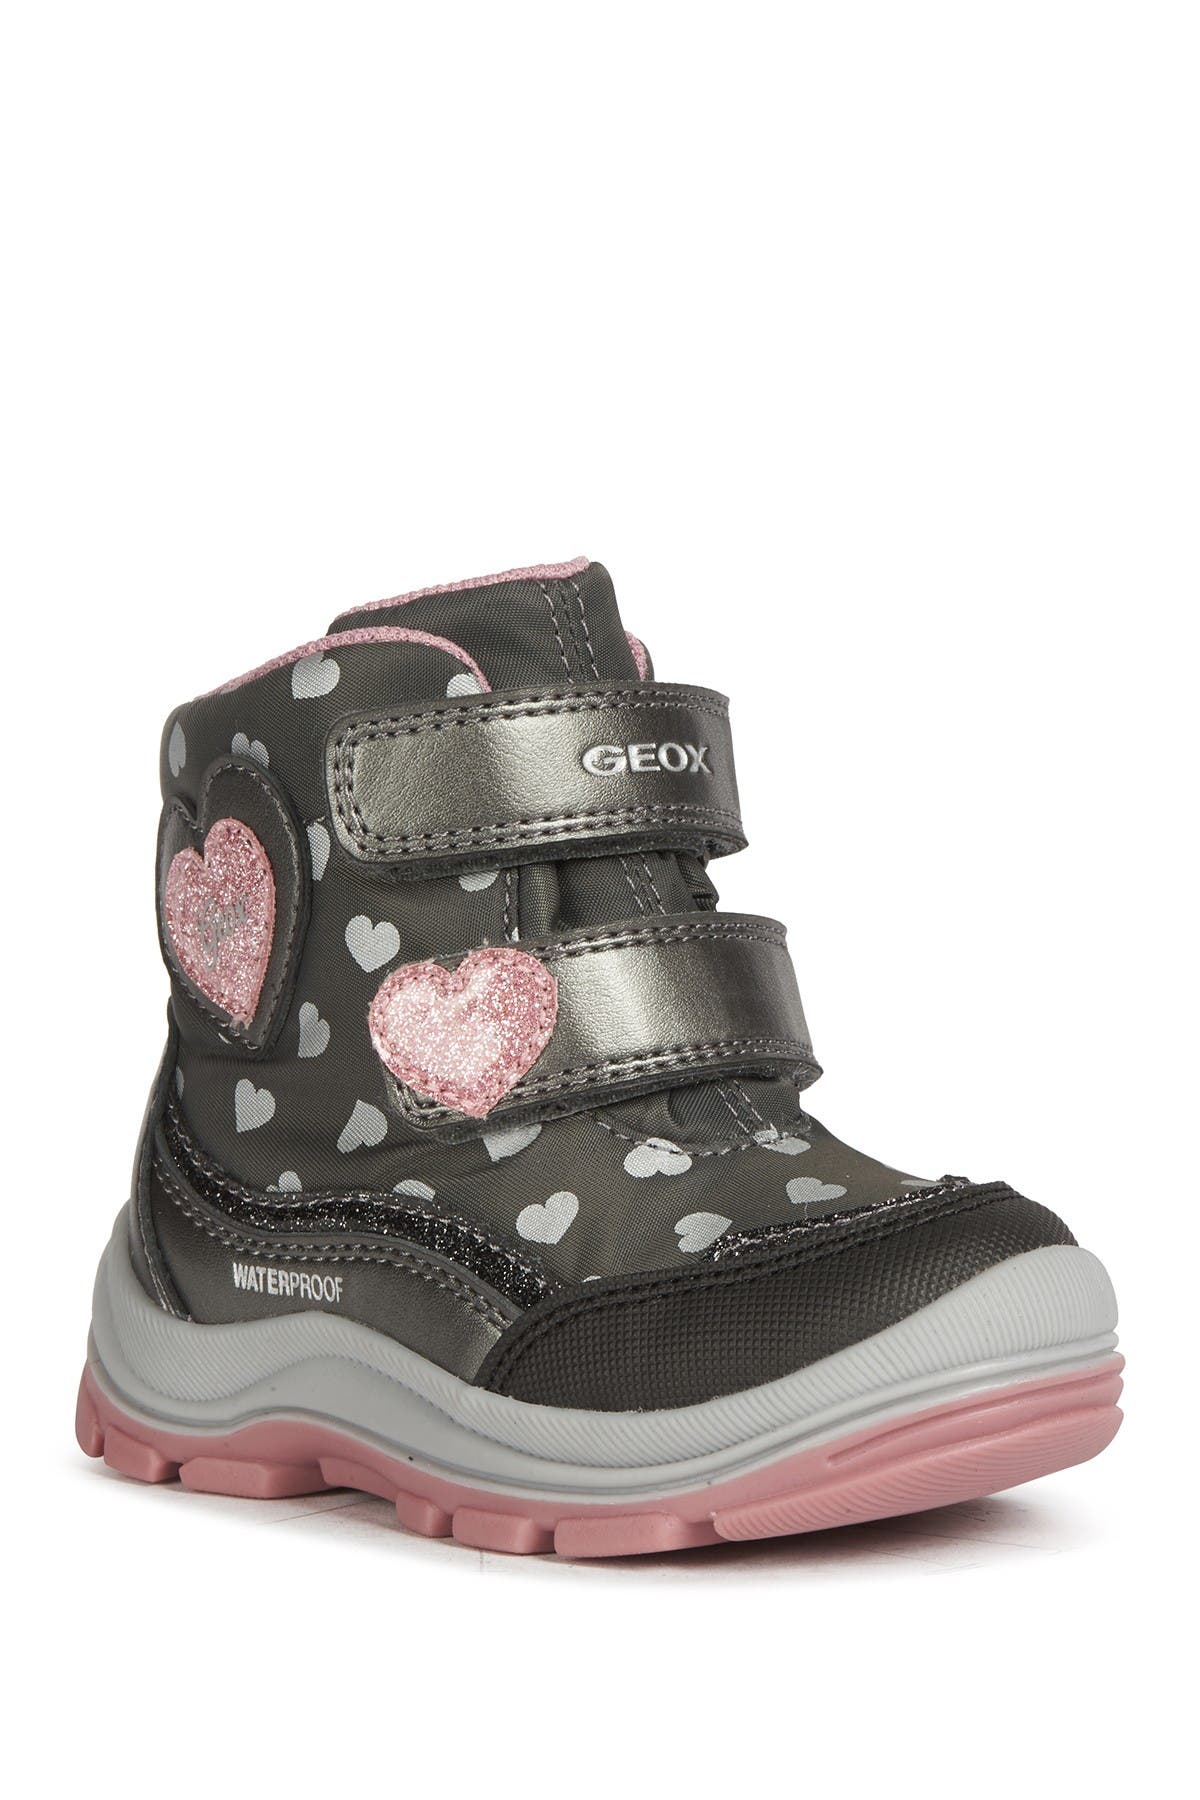 geox toddler girl boots